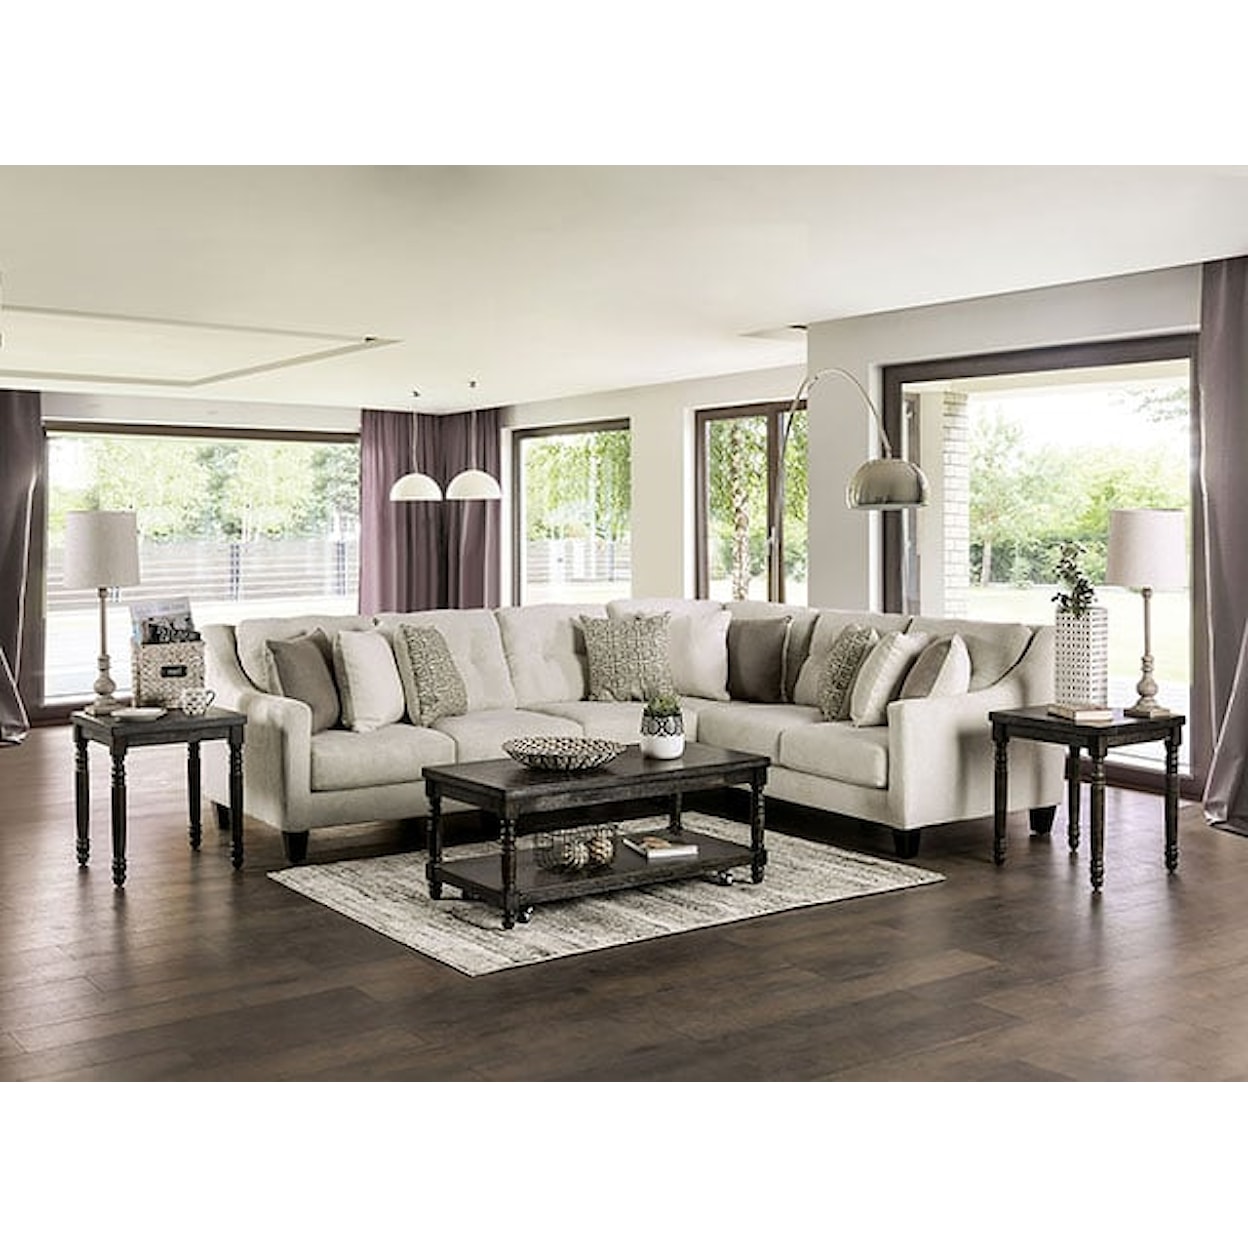 Furniture of America Waldport Sectional